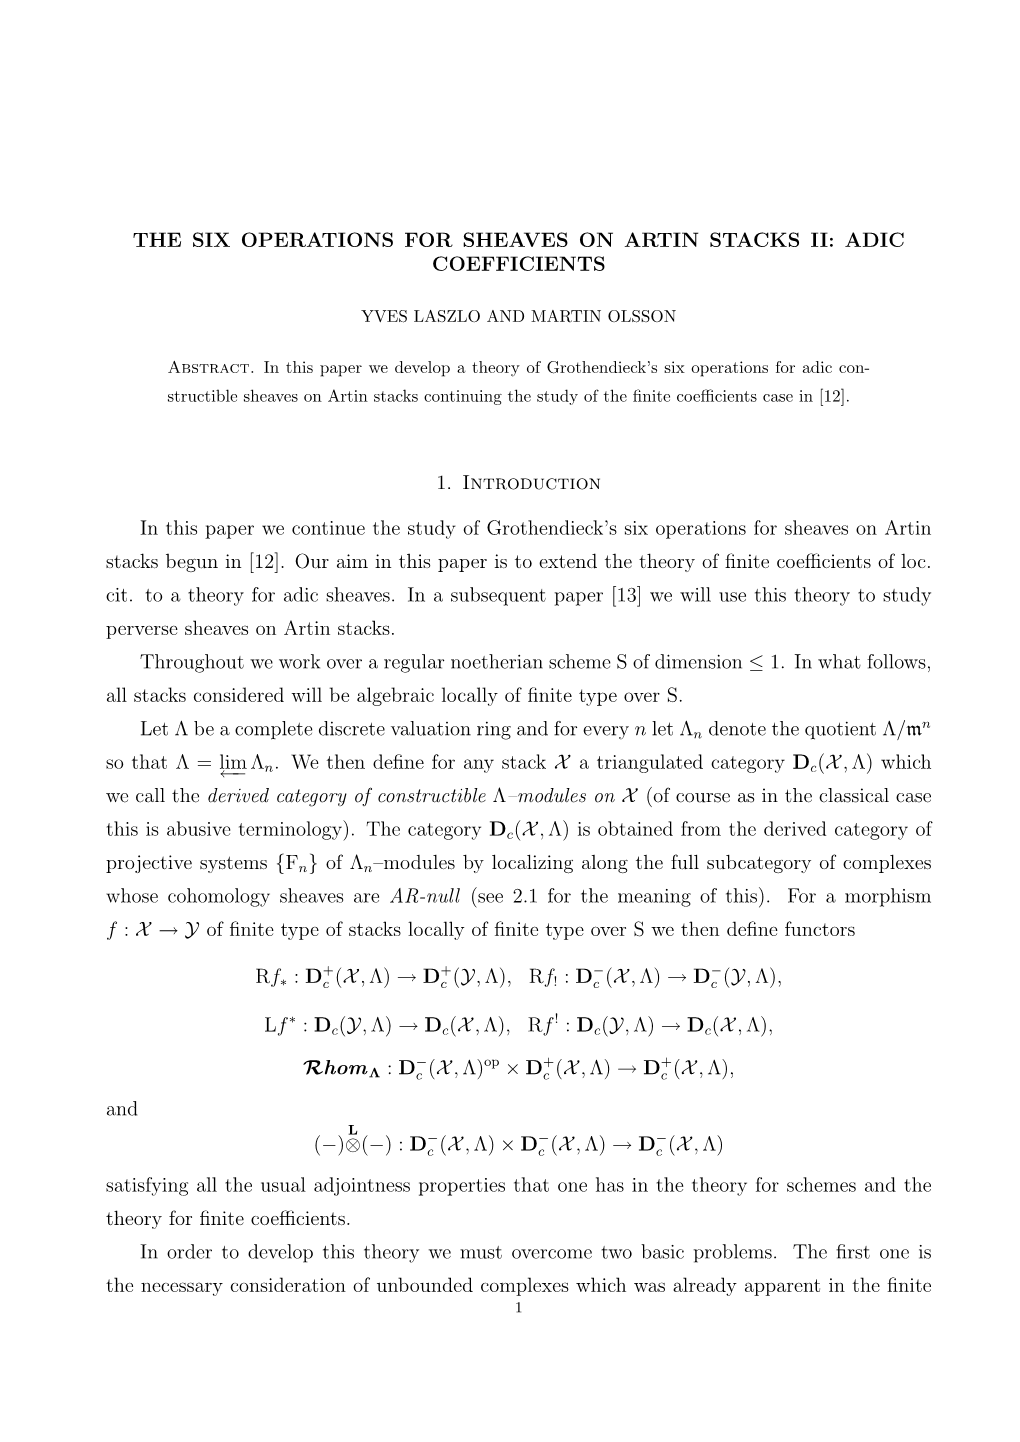 The Six Operations for Sheaves on Artin Stacks Ii: Adic Coefficients